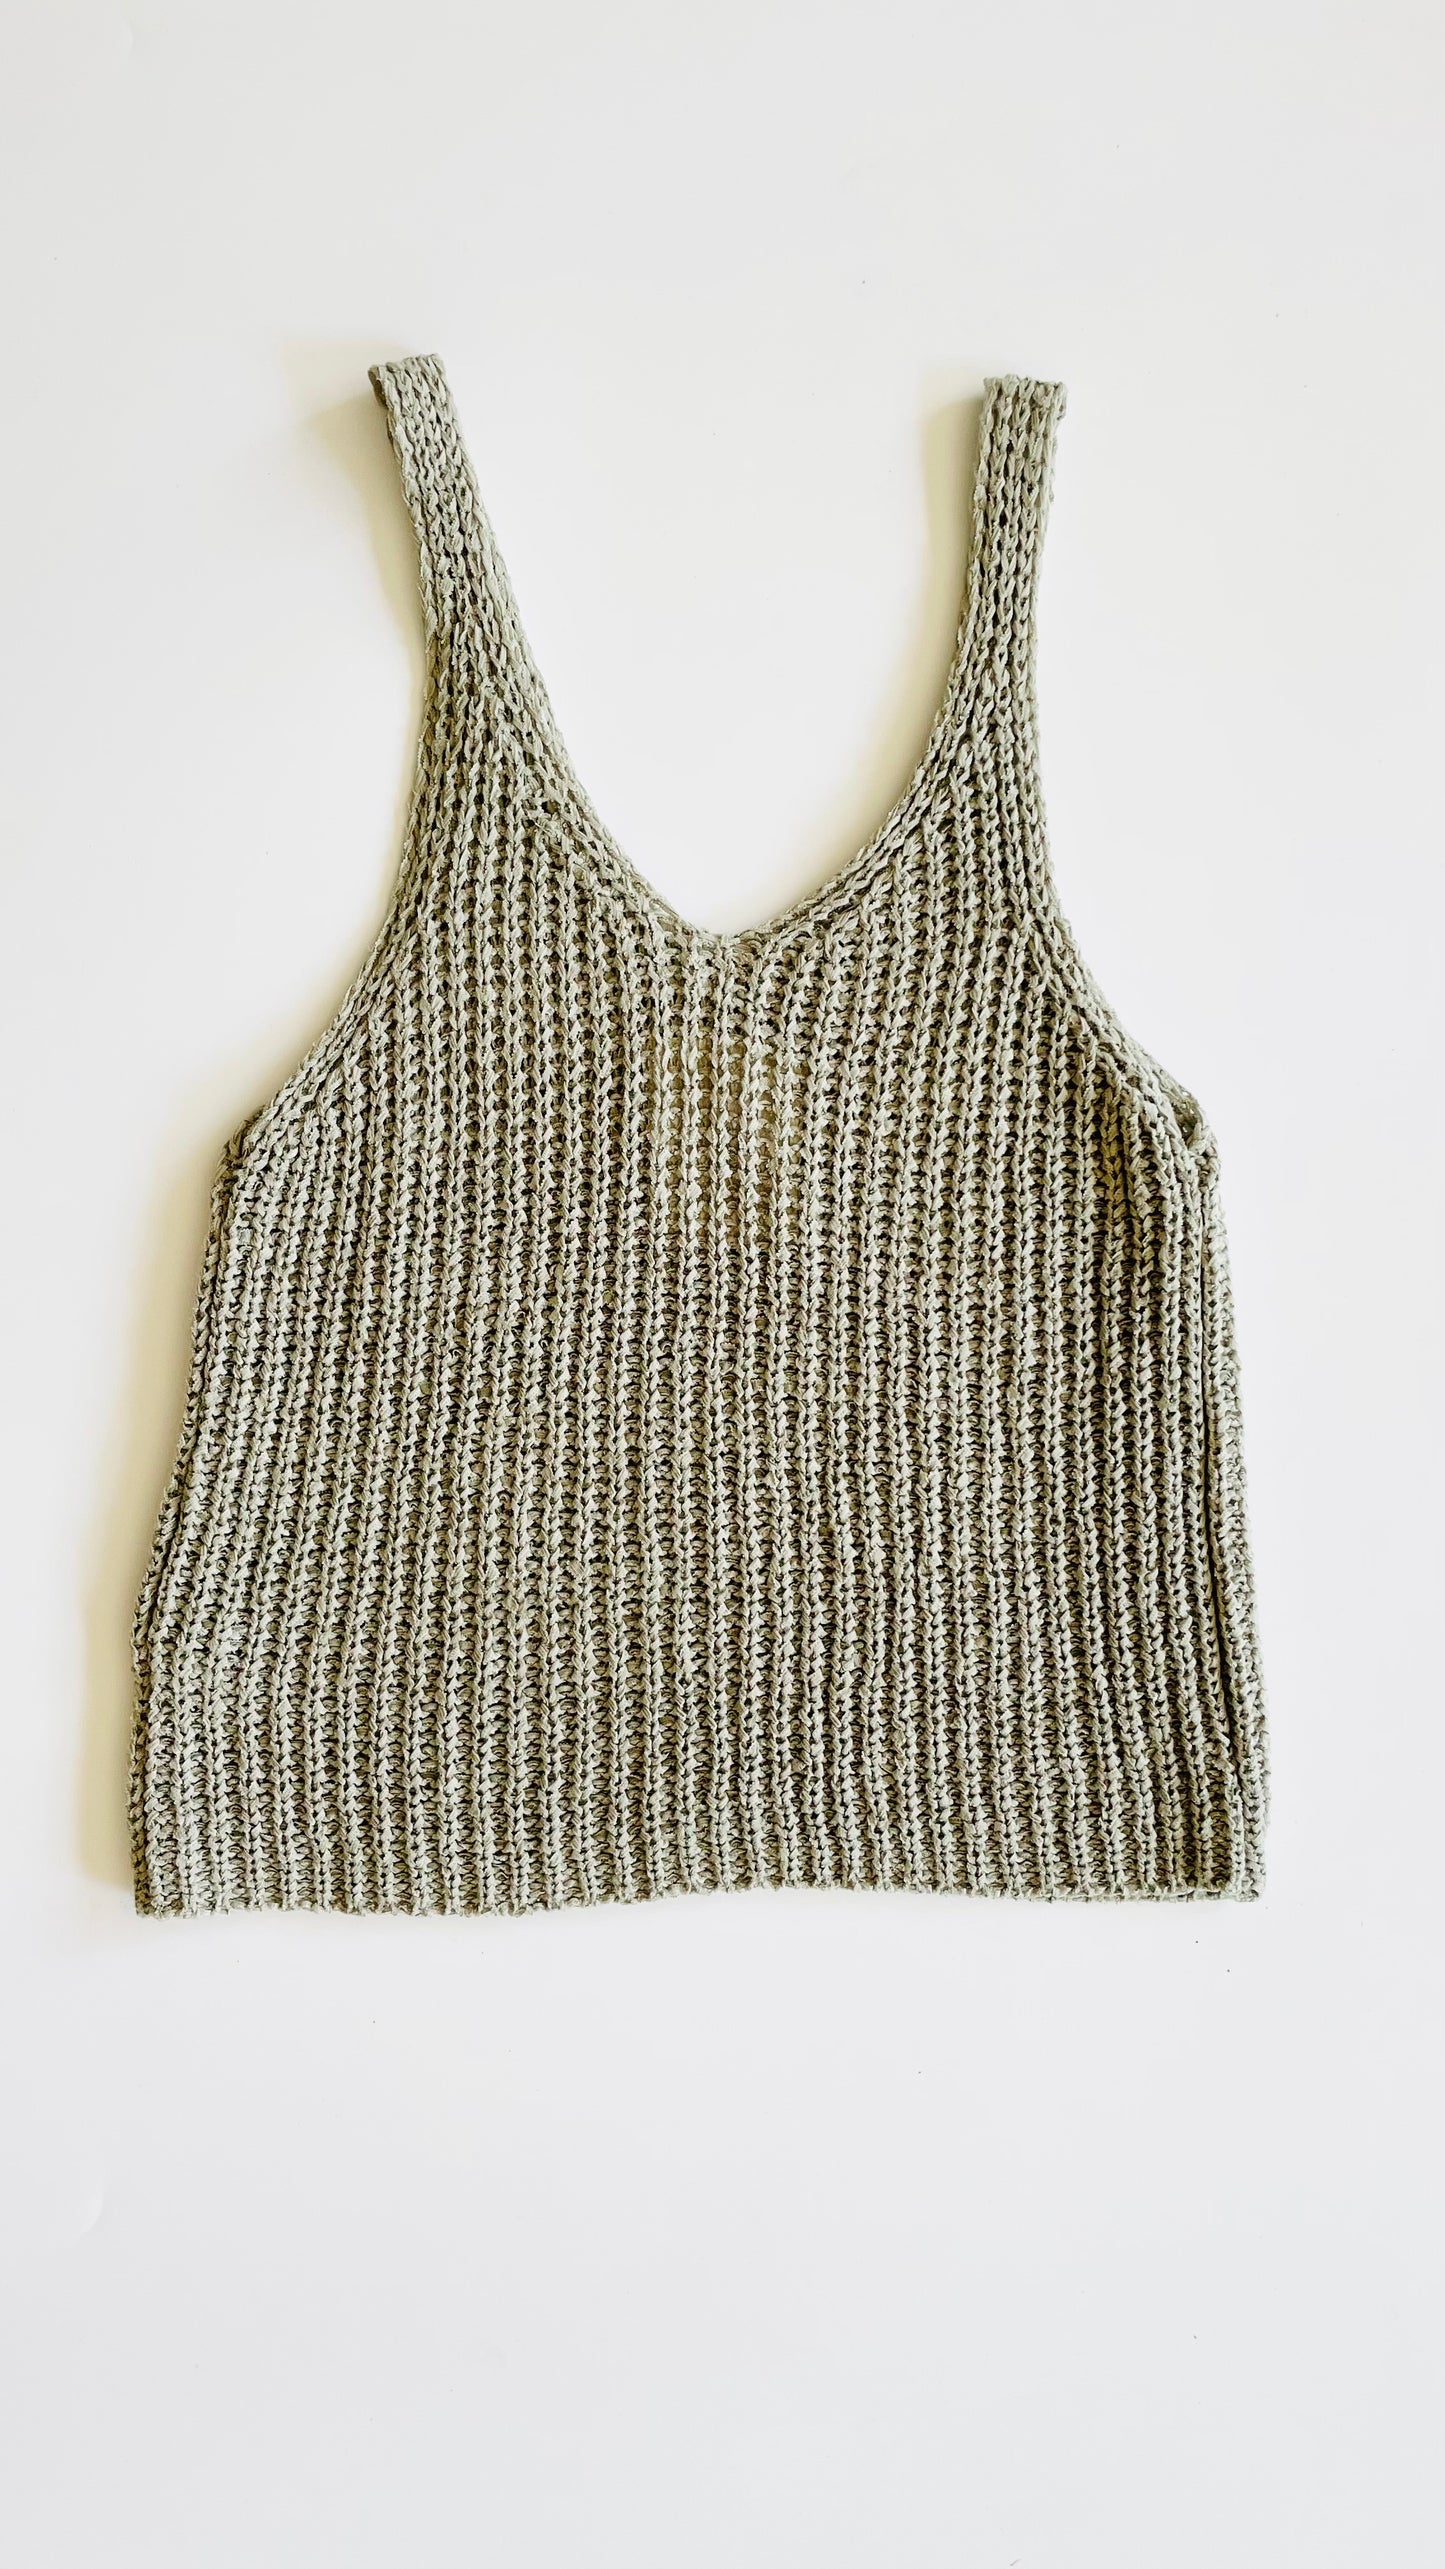 Pre-Loved big knit sage green tank top - Size S